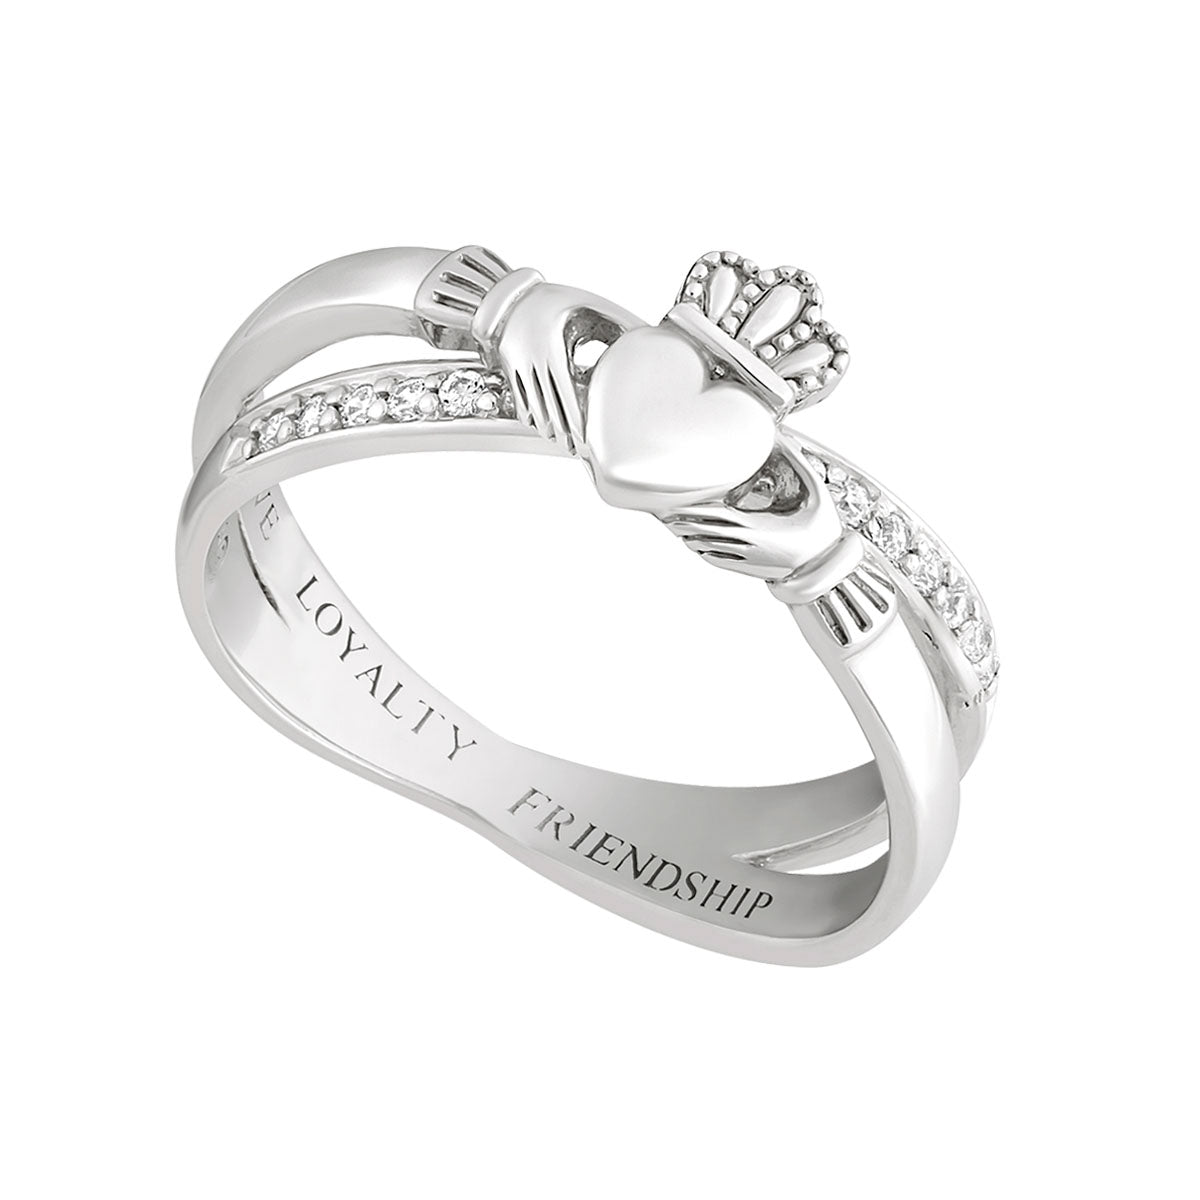 sterling silver claddagh crossover ring s21063 from Solvar